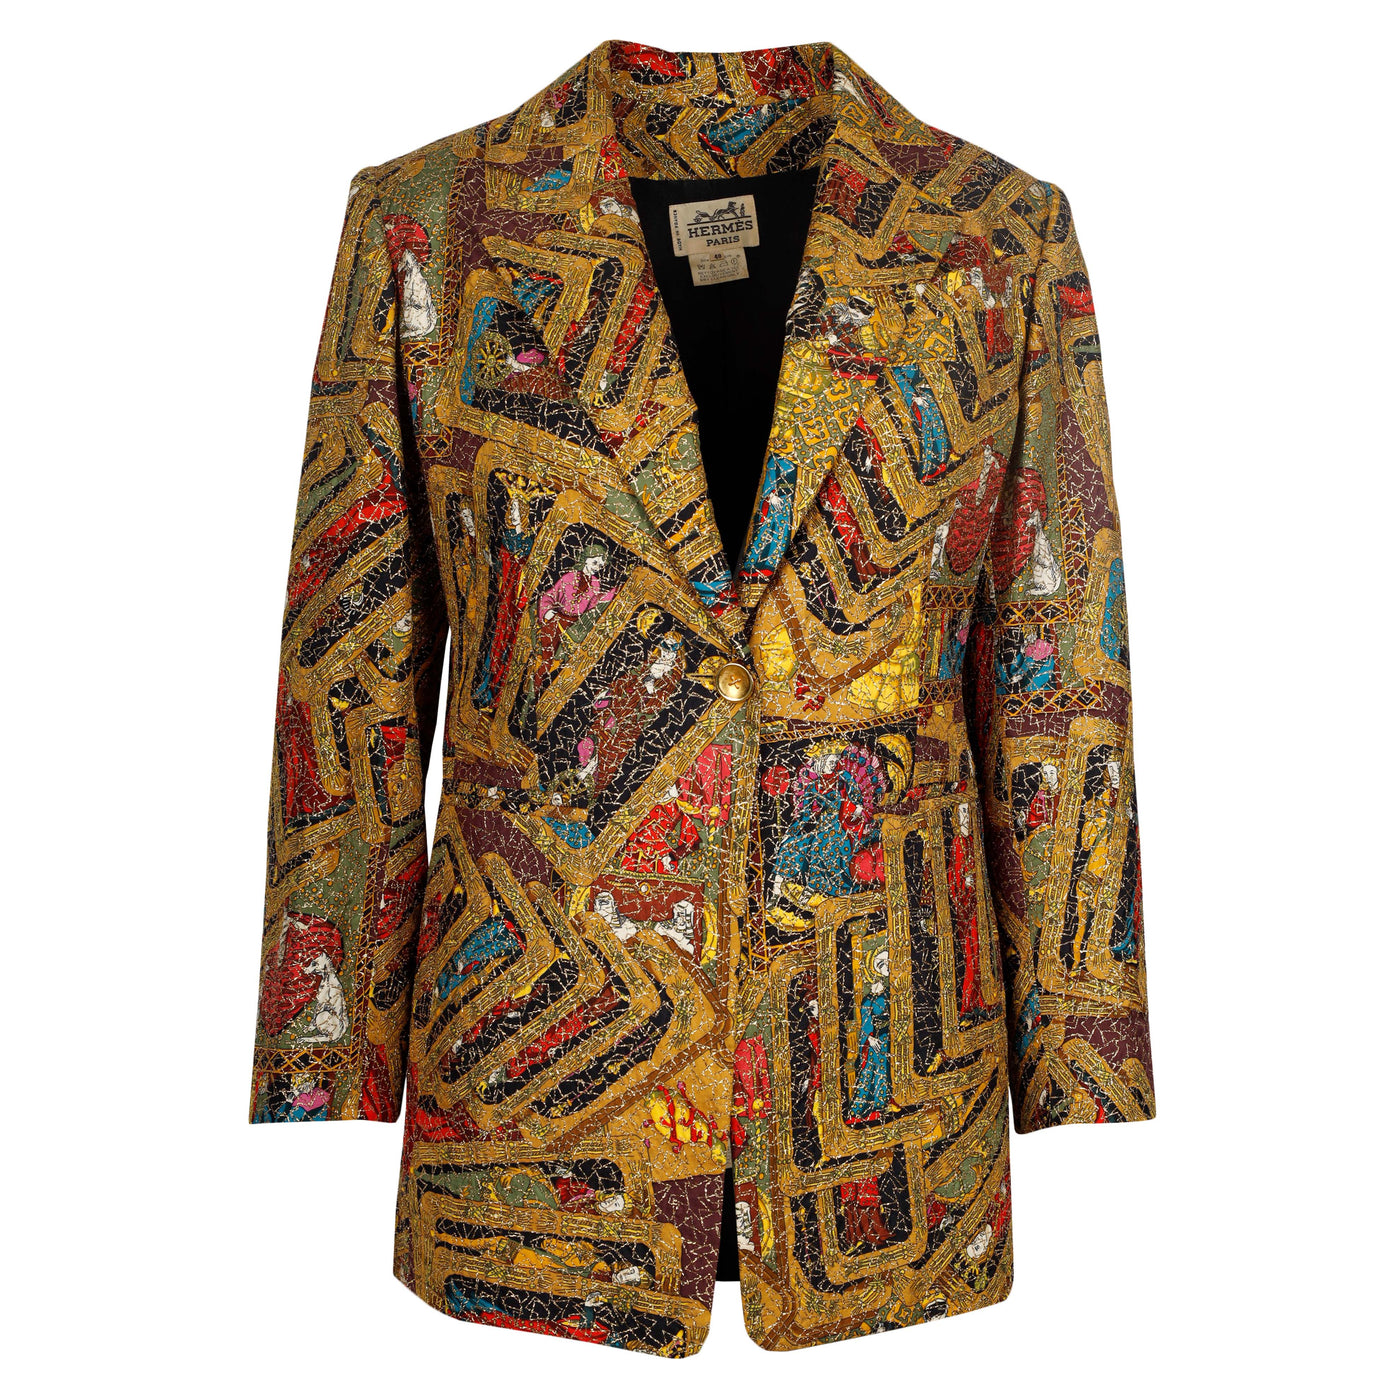 Second-hand Hermès Silk Printed Jacket with Metallic Embroidery